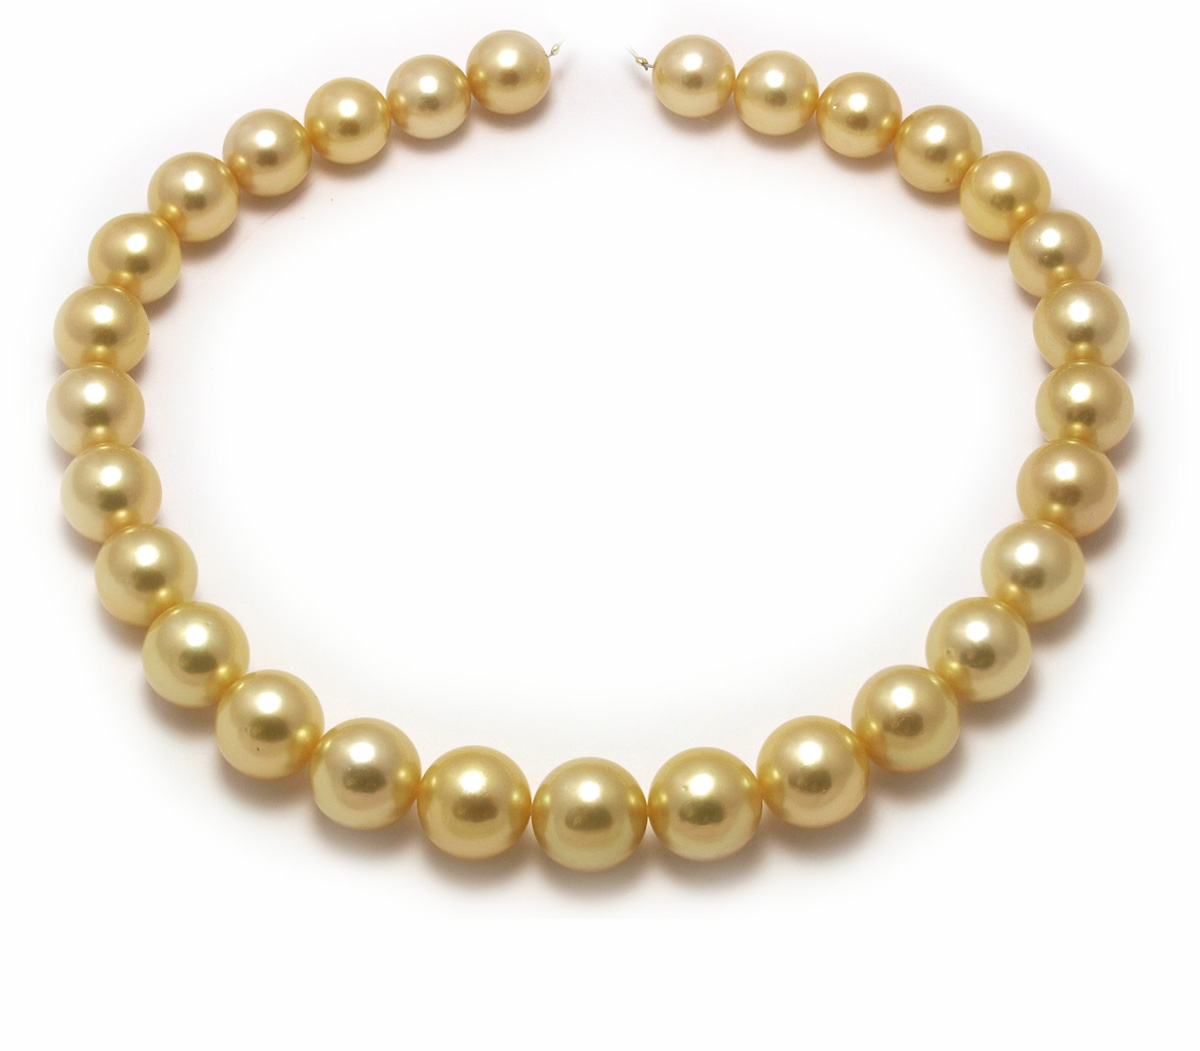 Large Golden South Sea Pearl Necklace with a 15mm Gold Pearls